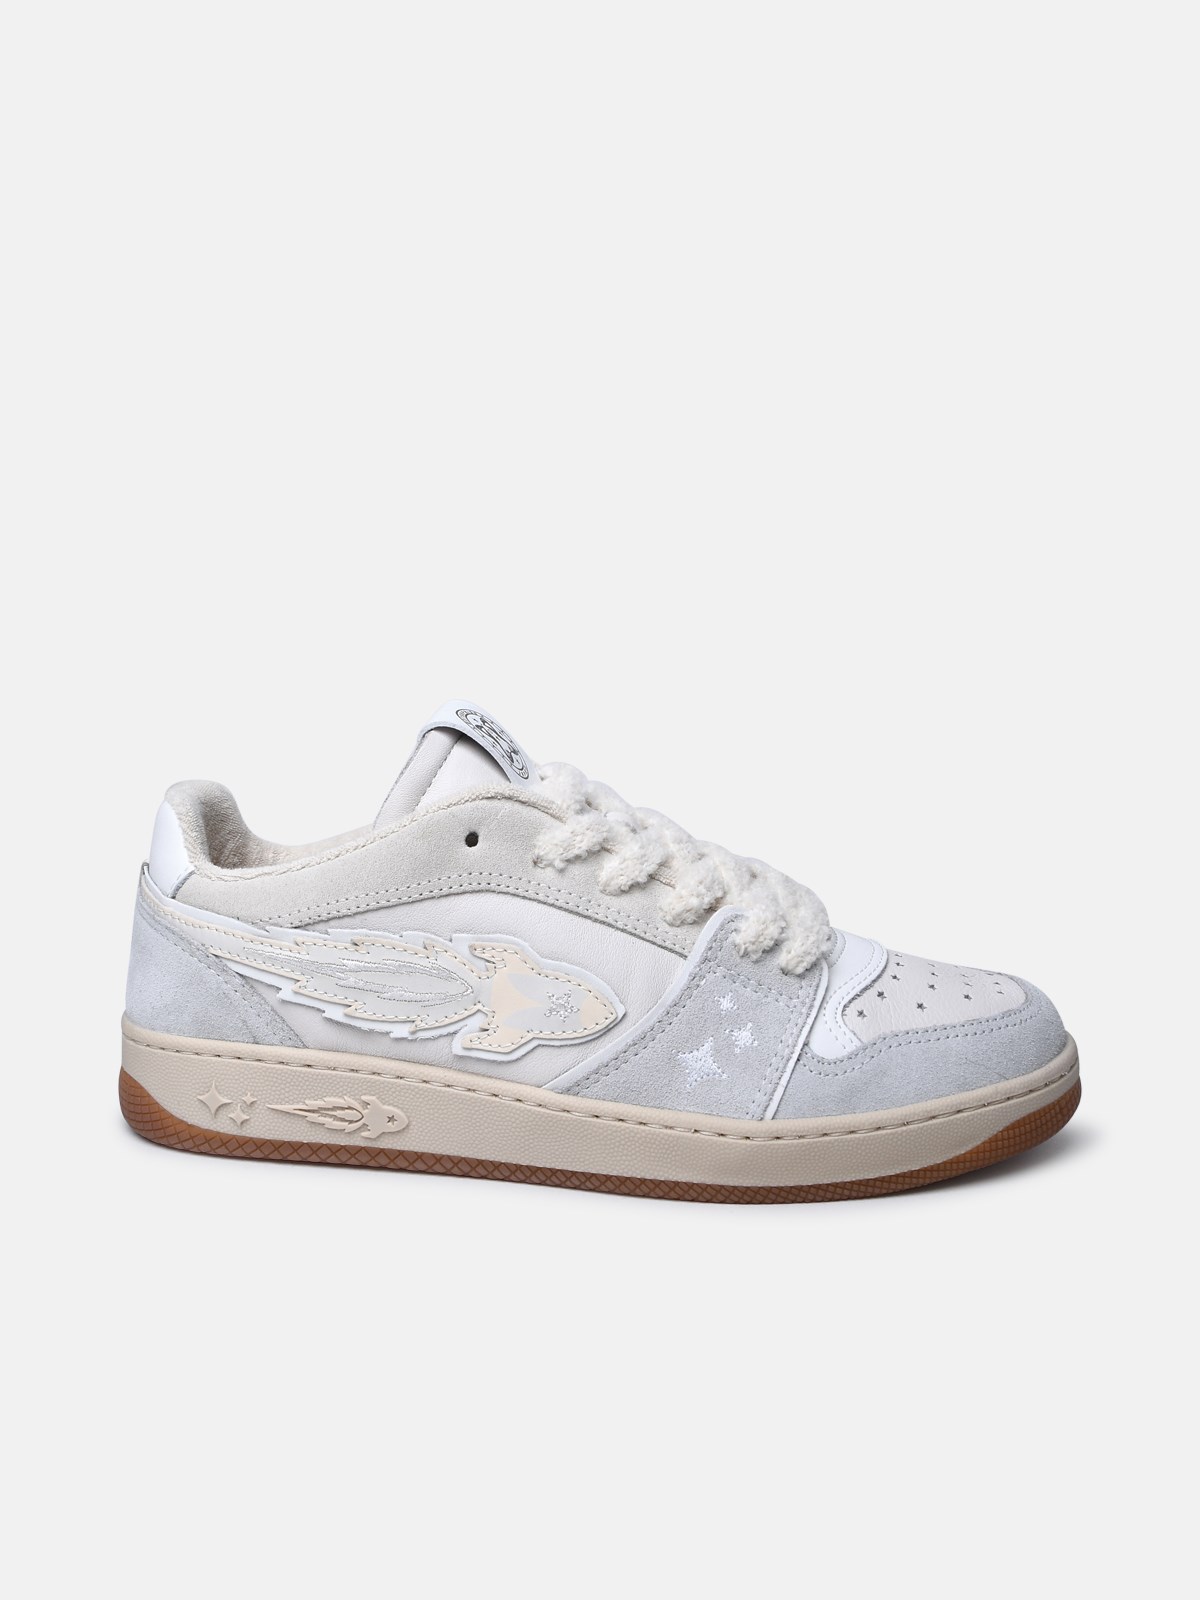 Enterprise Japan White Leather Sneakers In Cream